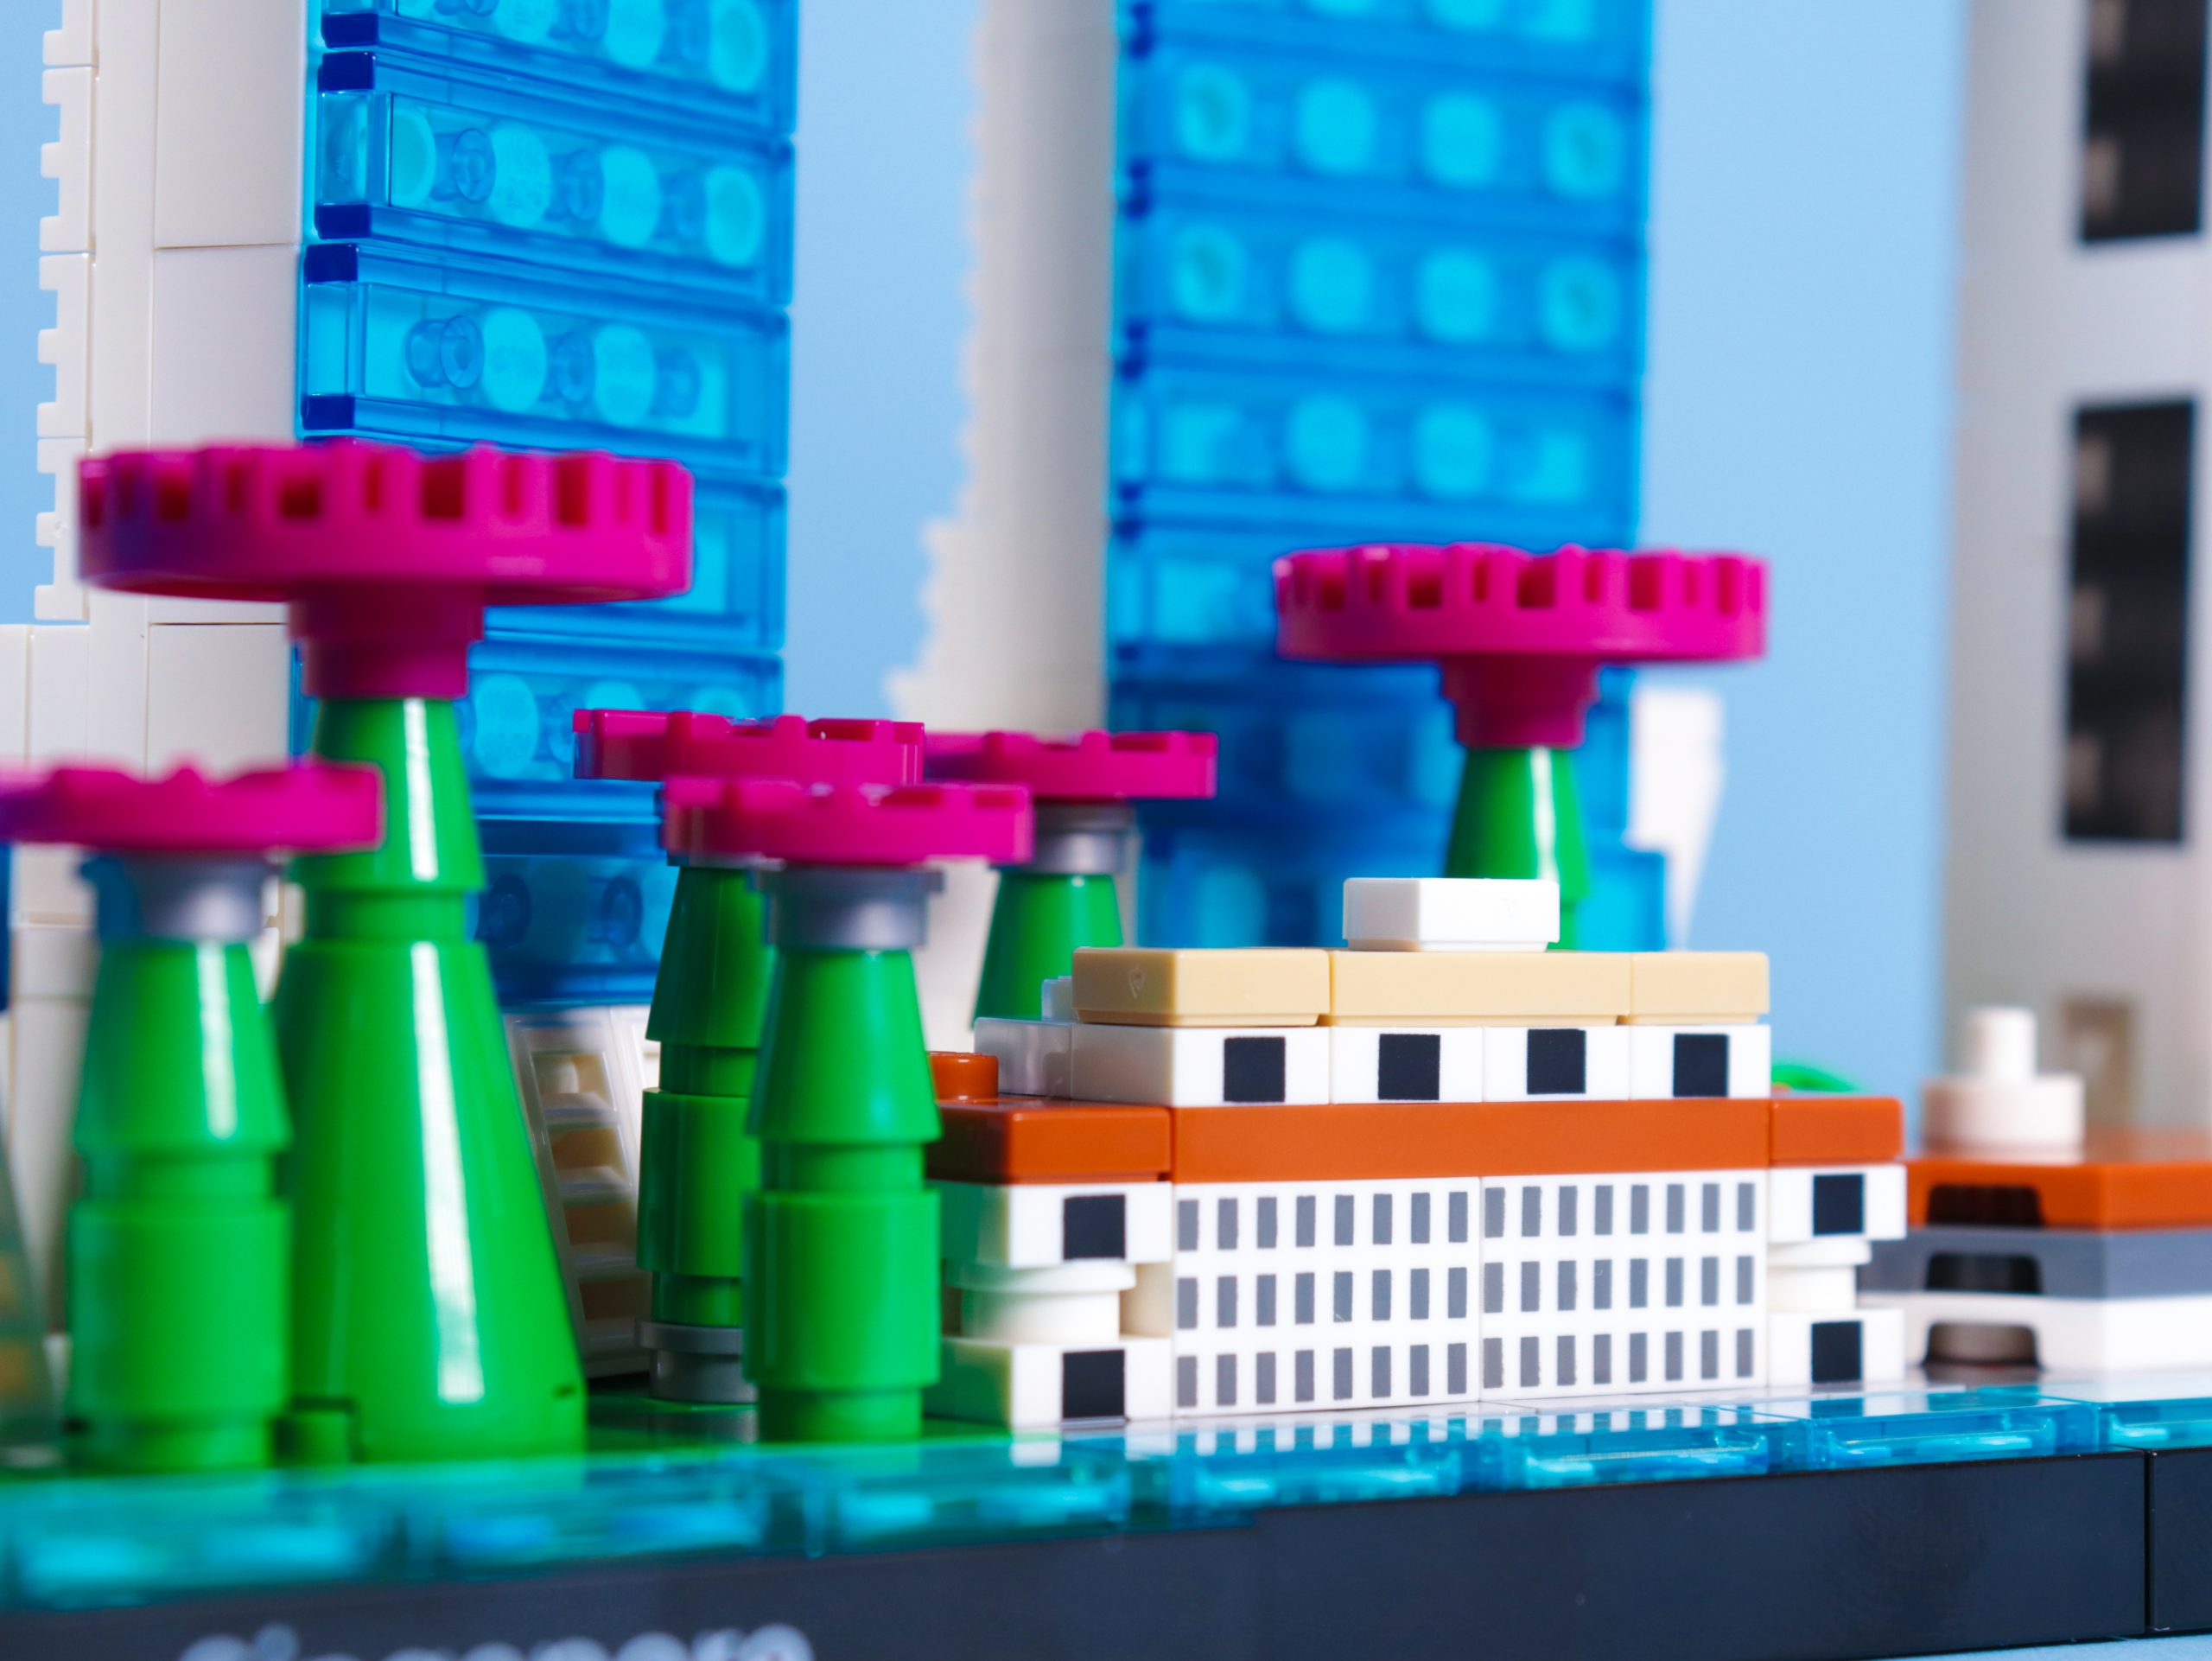 We Test The New Wave Of Super Mario From LEGO On 3 & 4-Year-Olds